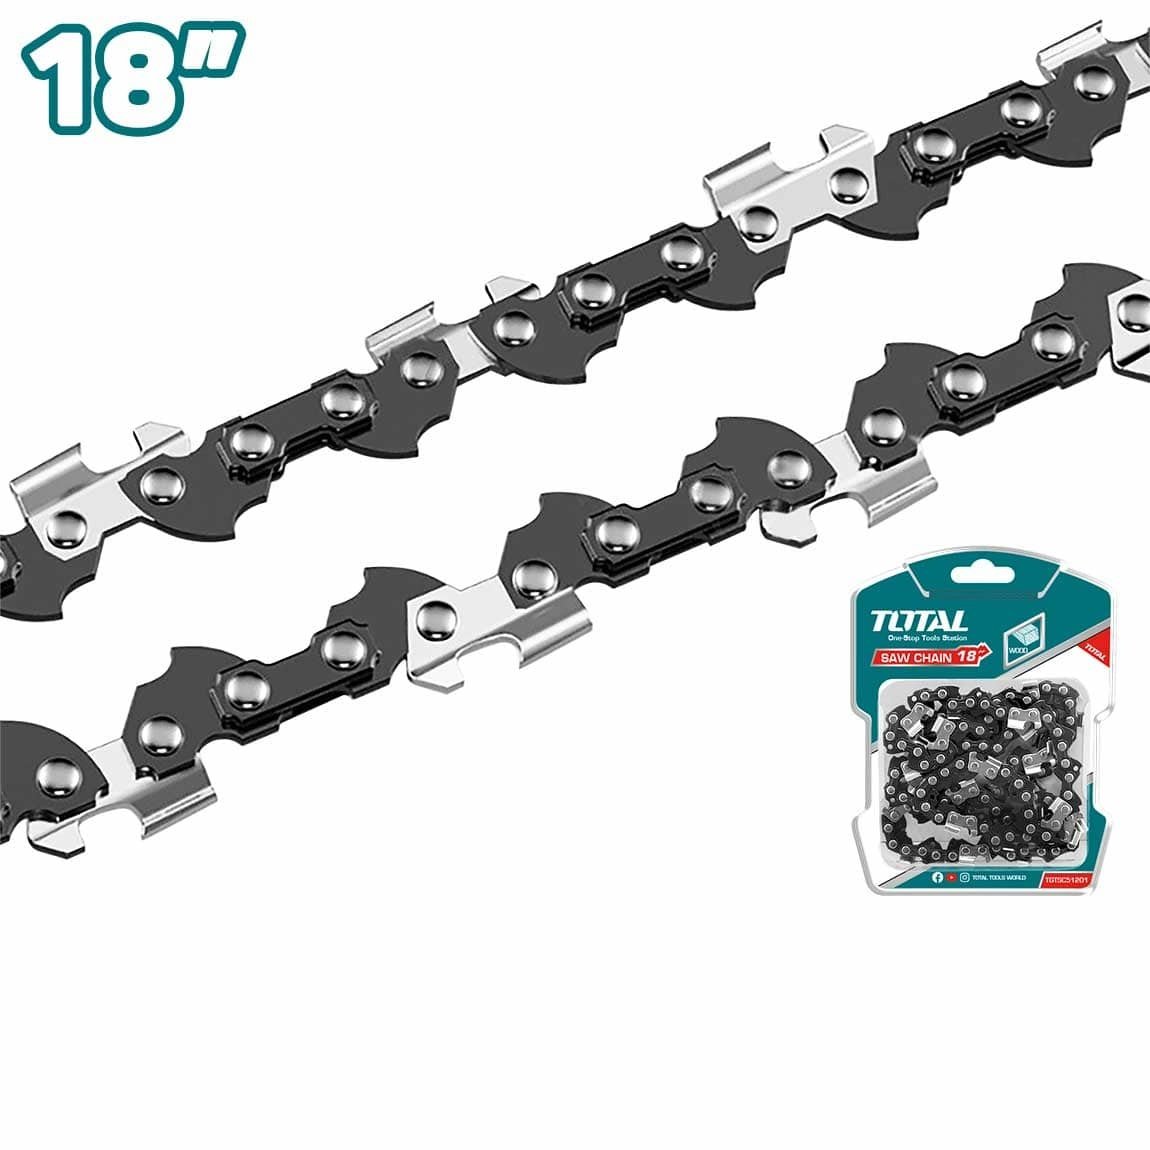 Total Saw Chain 18" - TGTSC51801 | Supply Master | Accra, Ghana Chainsaw Buy Tools hardware Building materials